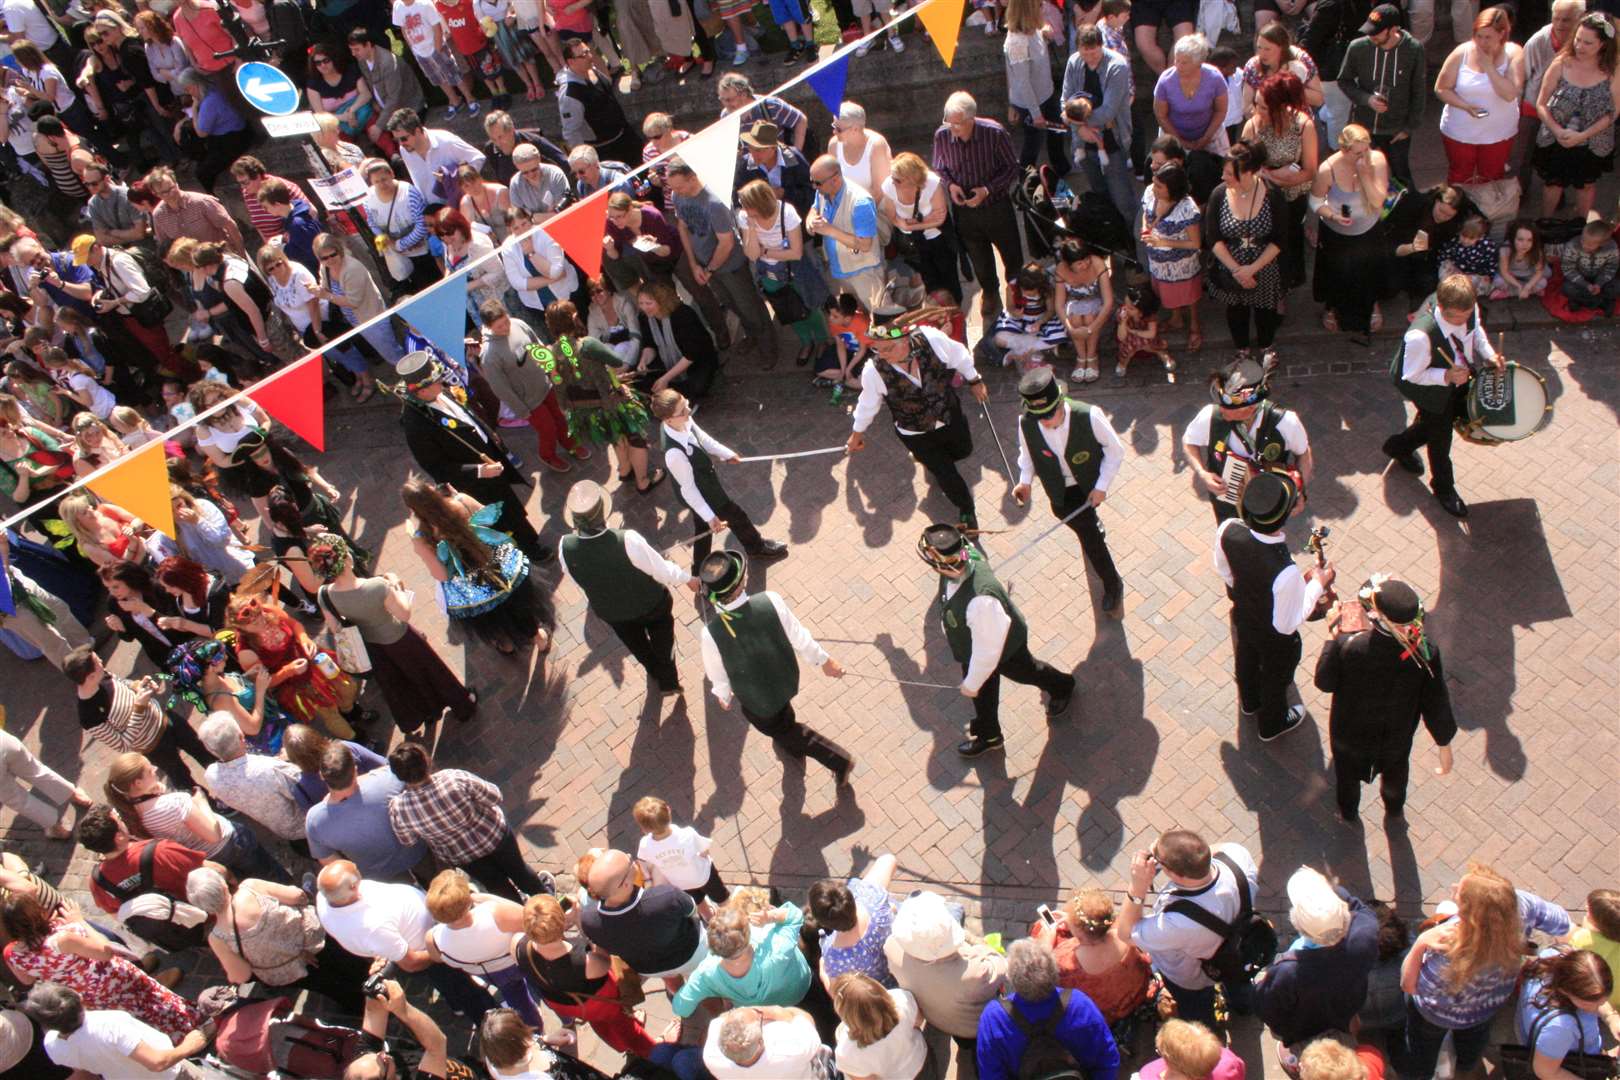 The fun runs from 10.45am on Saturday, April 30, until the final procession at 2.30pm on Monday